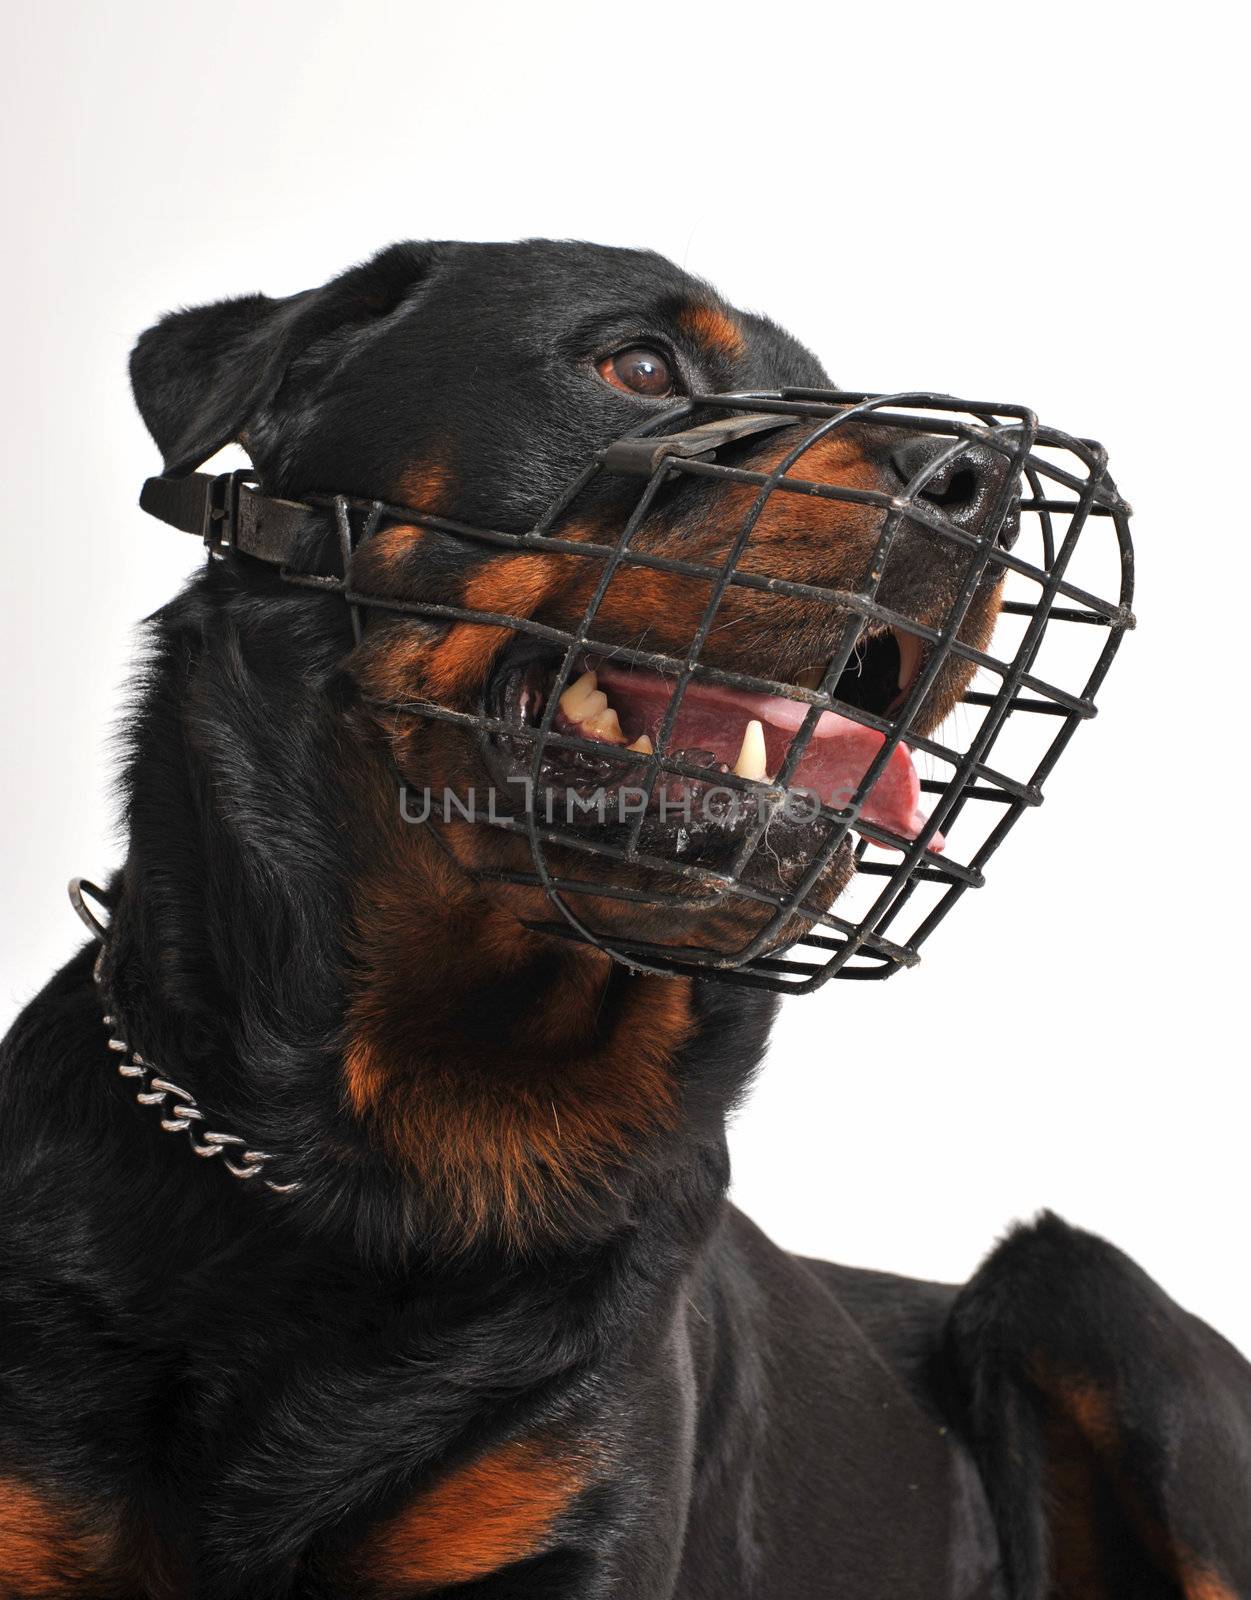 portrait of a purebred rottweiler with his muzzle